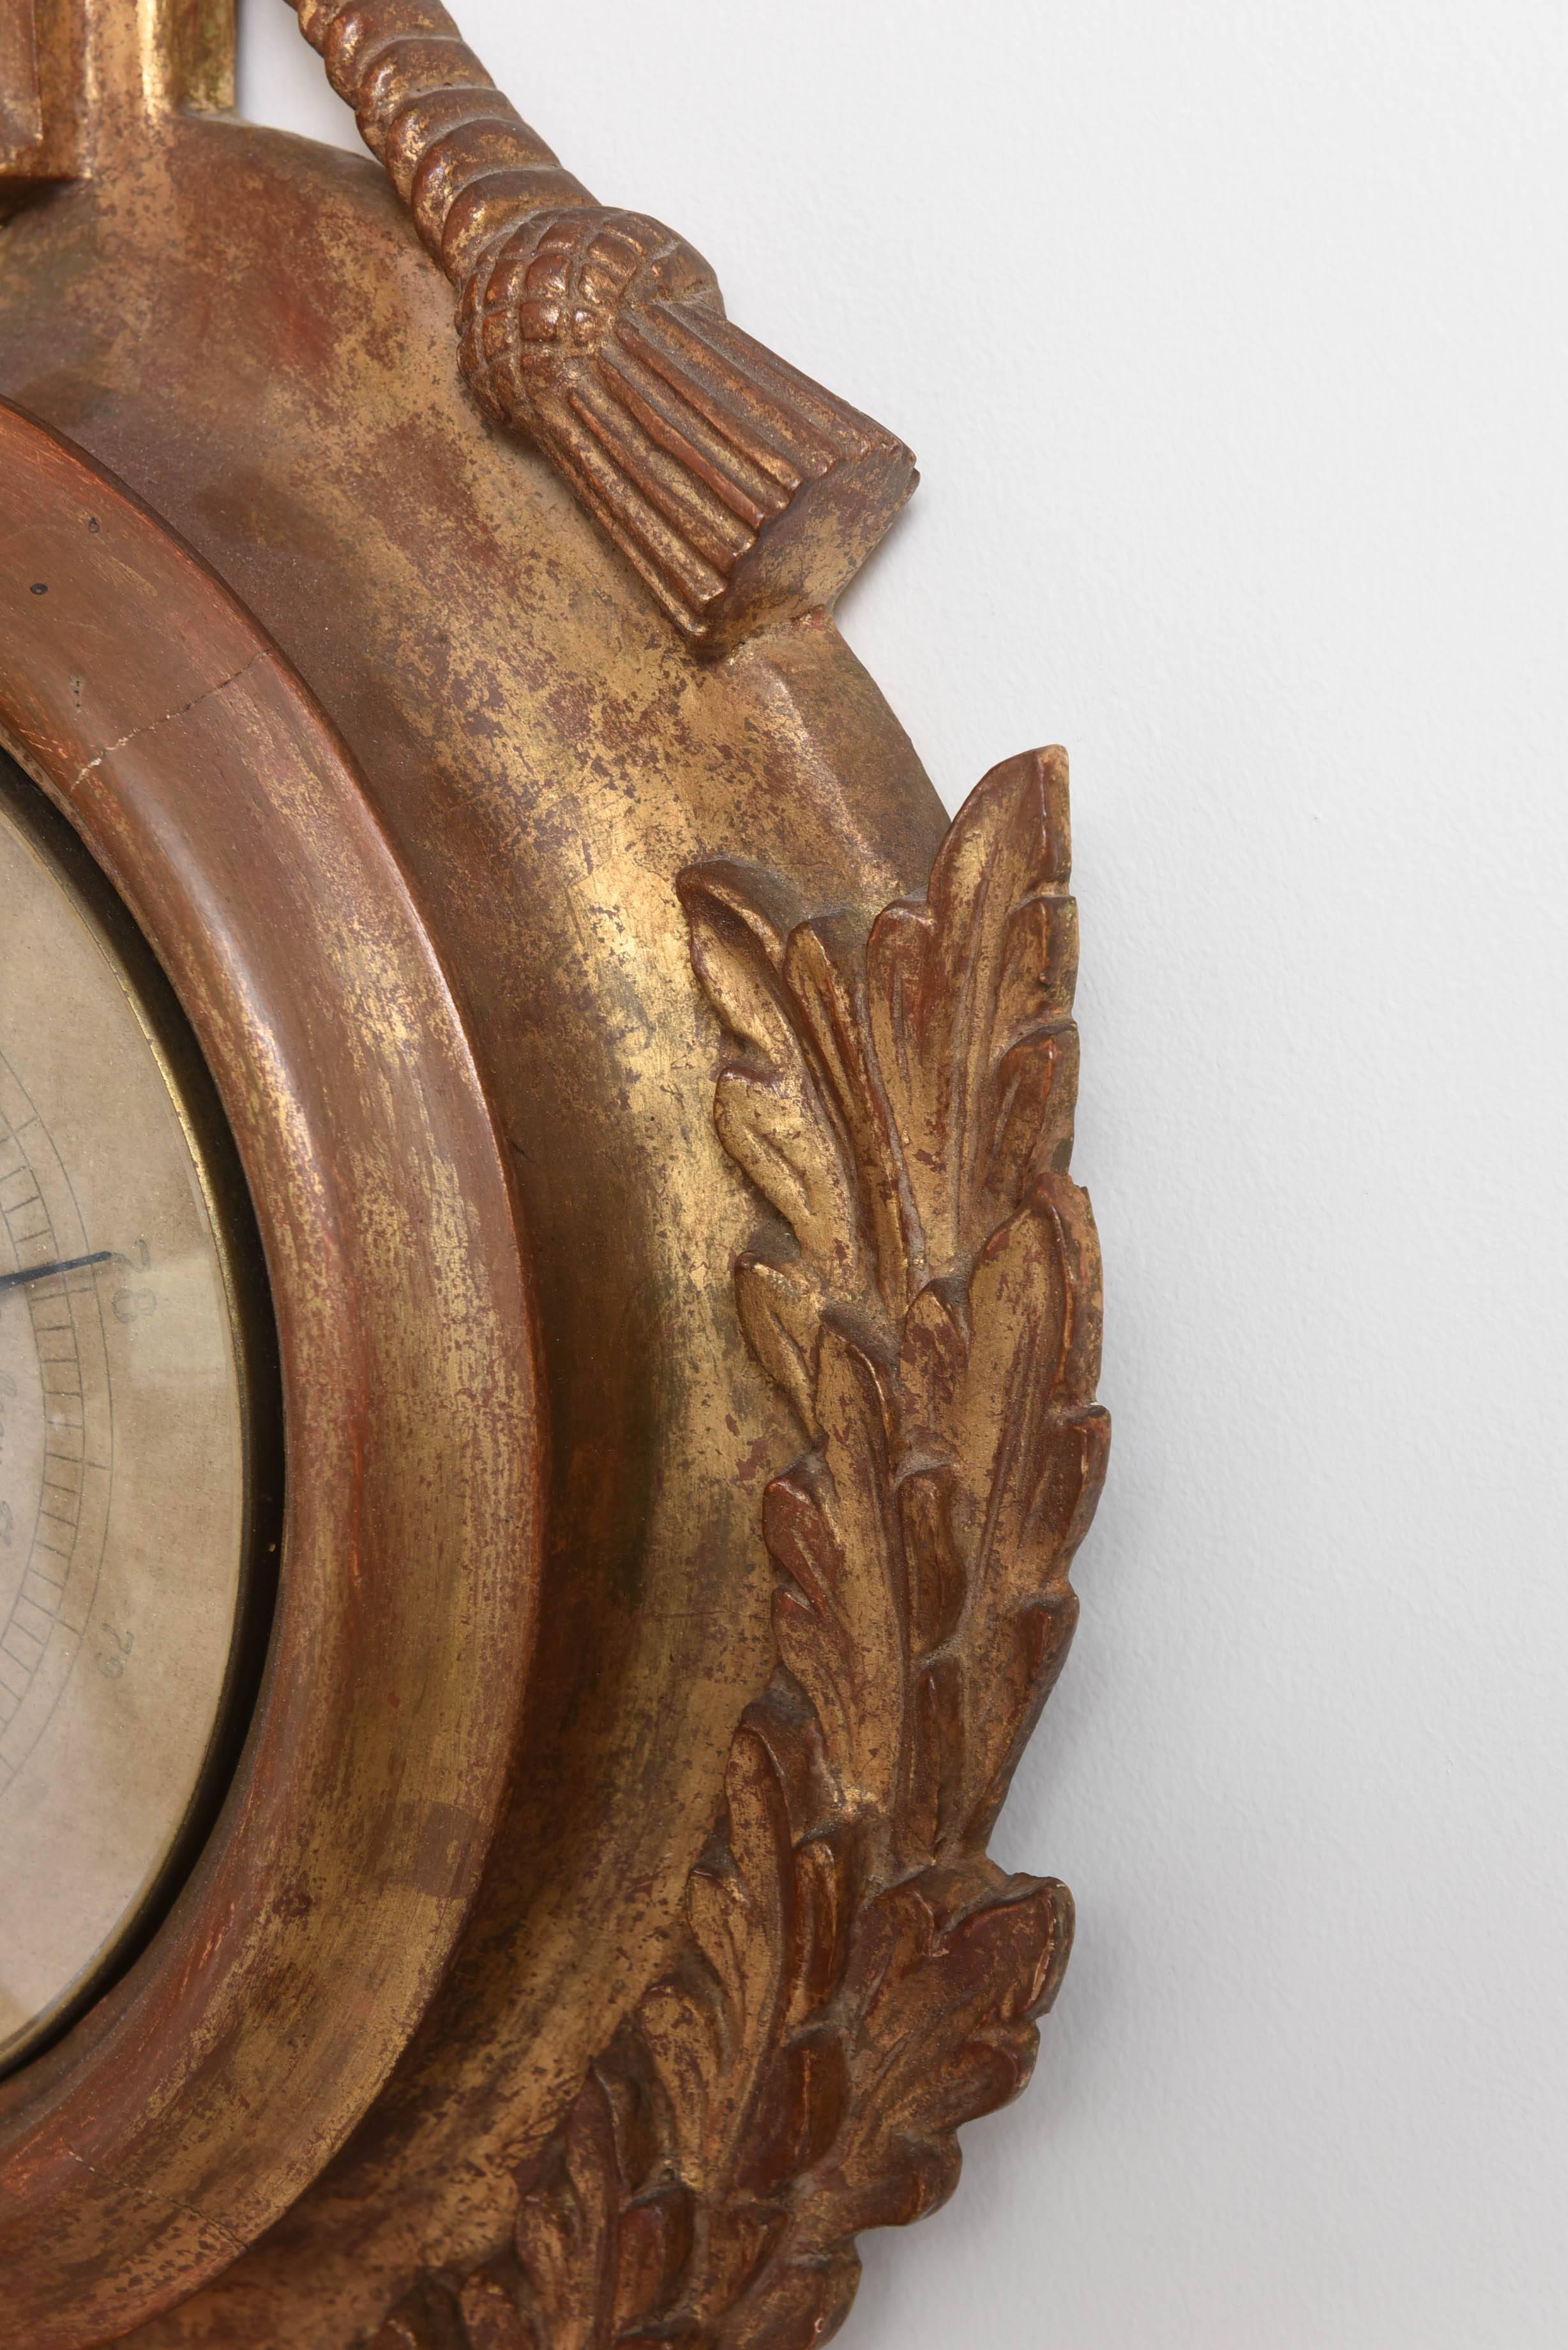 Rope and Swag Gilded Carved Wood Palladio Barometer 1